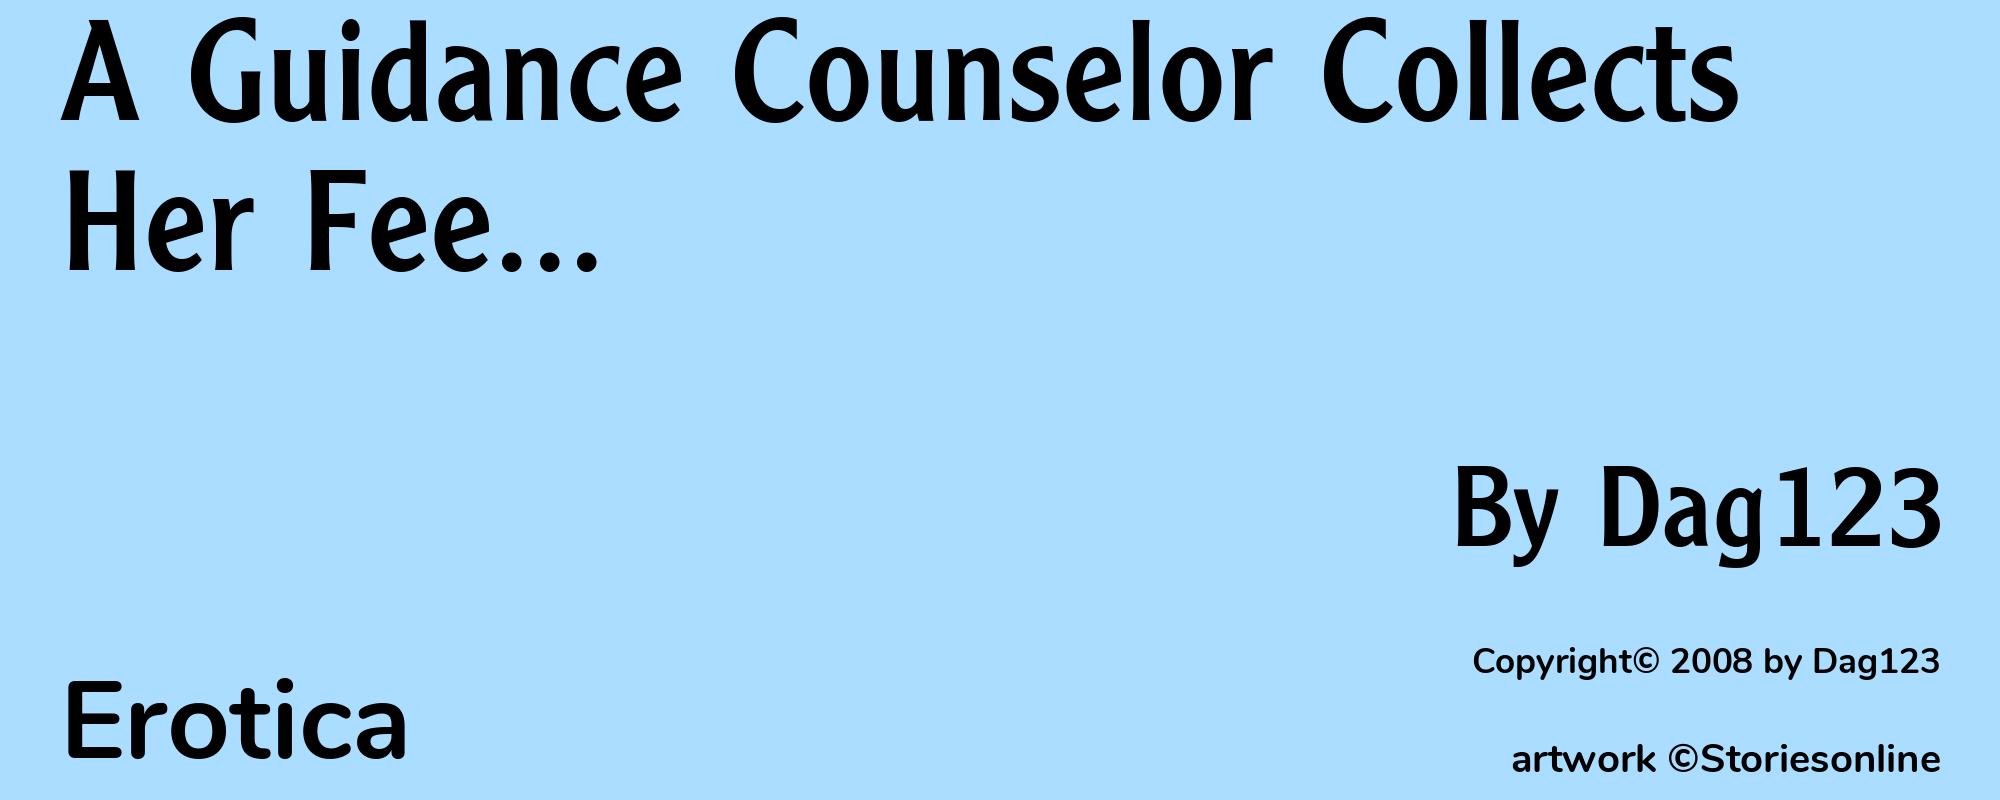 A Guidance Counselor Collects Her Fee... - Cover